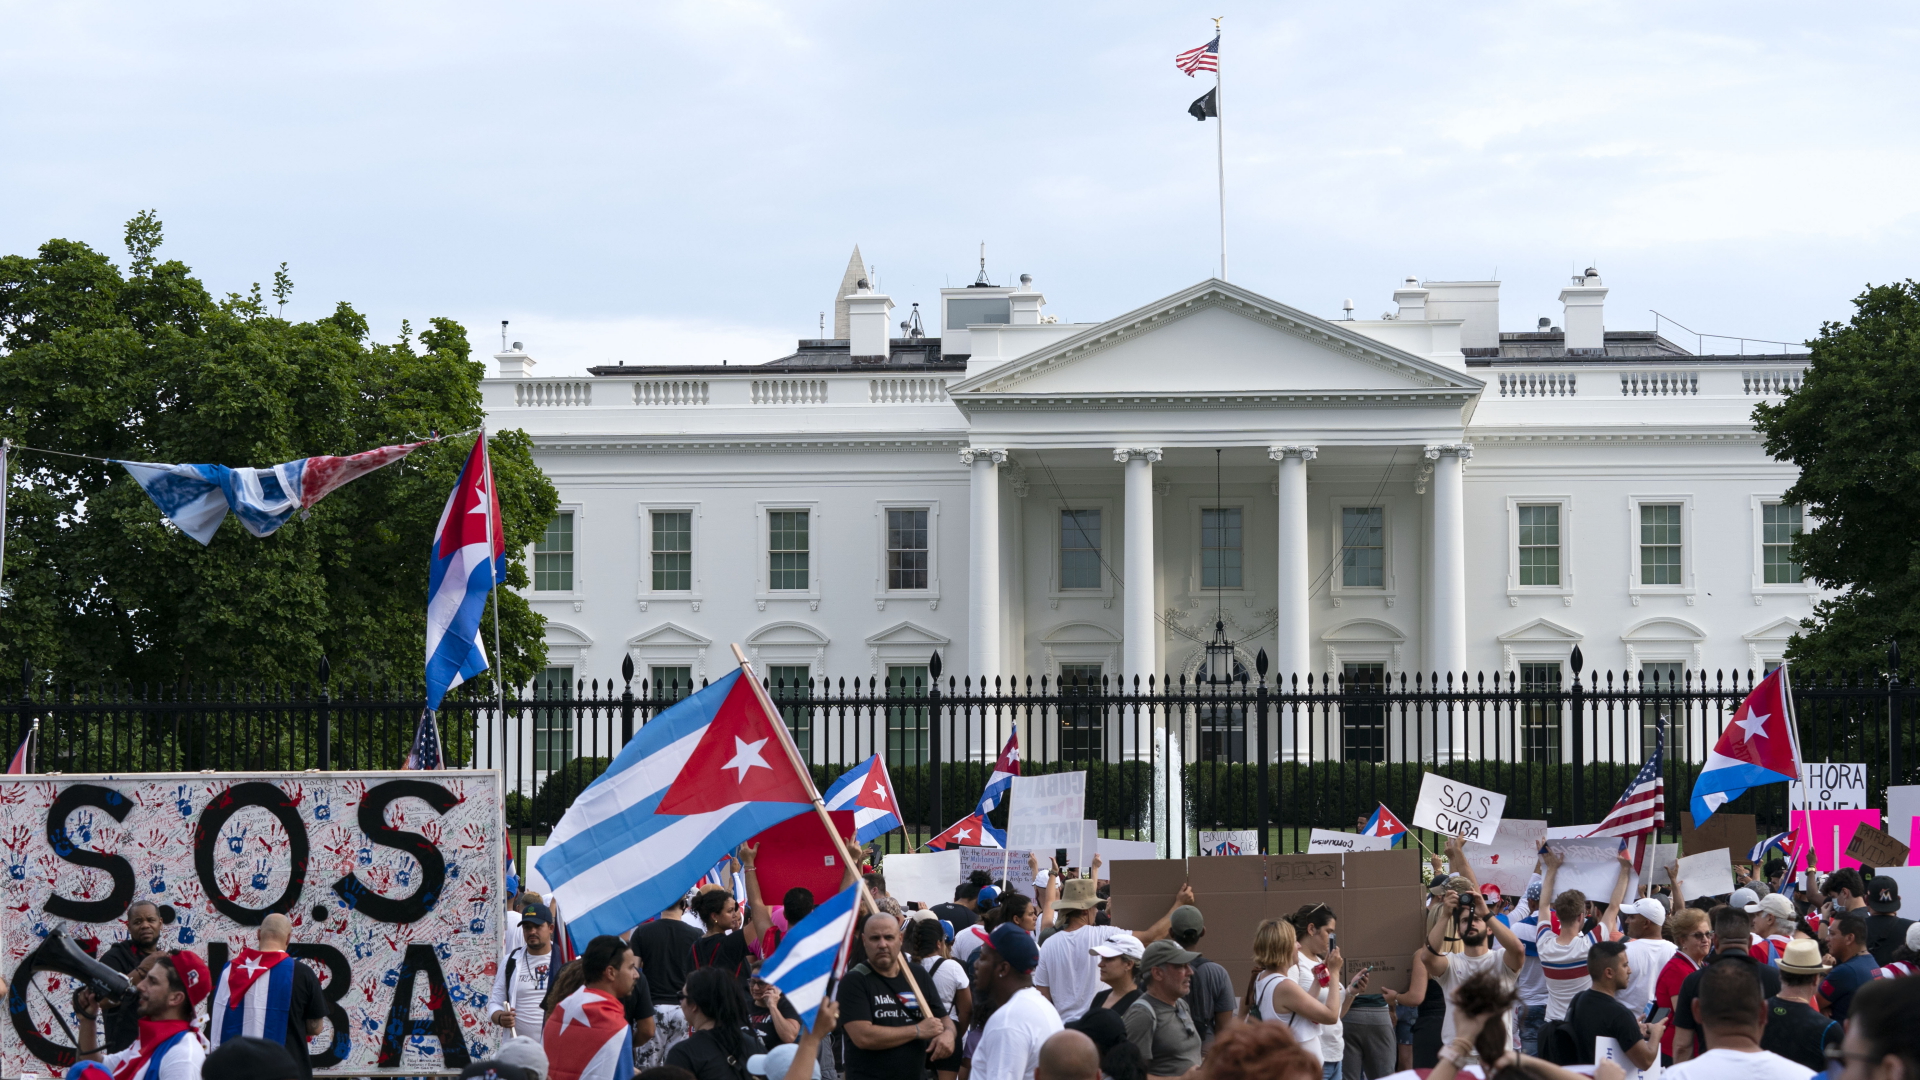 Because of the human rights situation: More US sanctions against Cuba